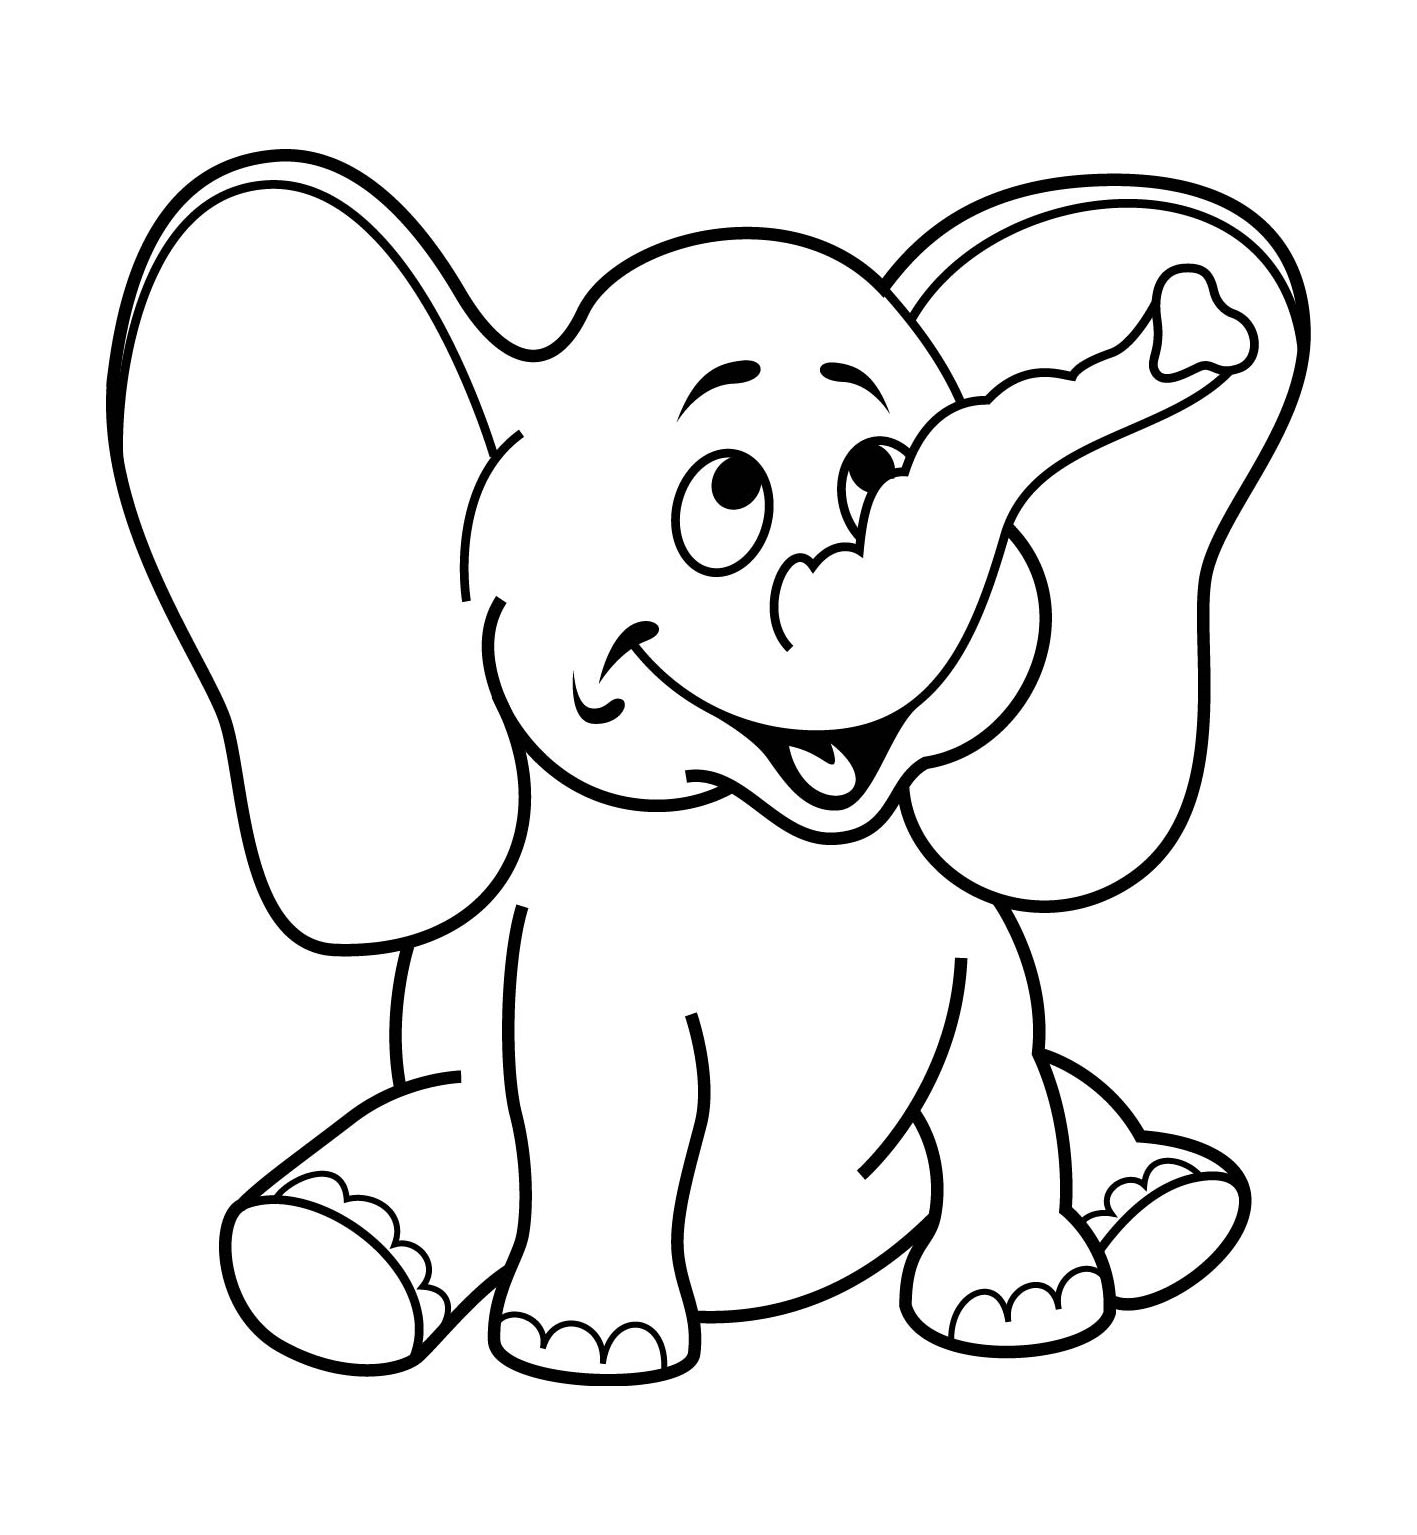 Coloring Pages For 1 Year Olds Coloring Pages